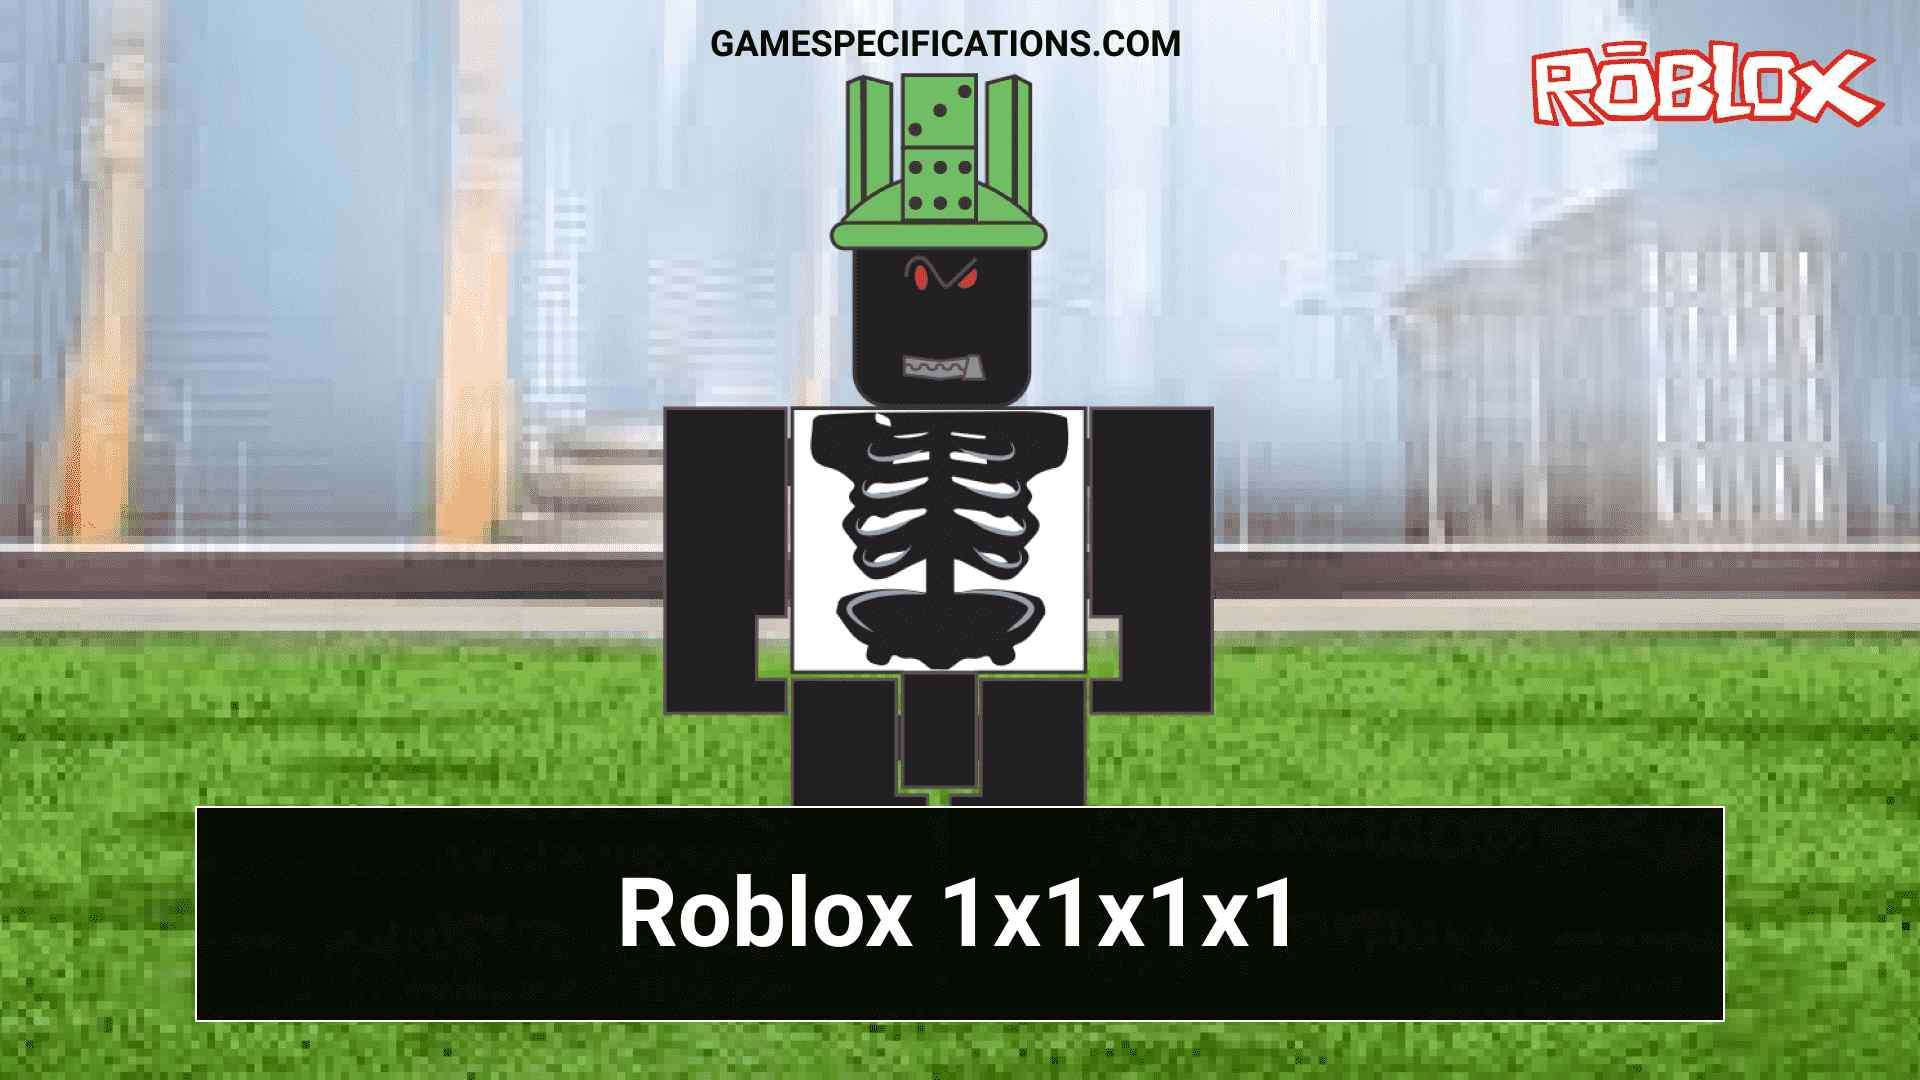 120+ Roblox Music Codes Rap [2023]  22gz, 6IX9IN, And Others - Game  Specifications